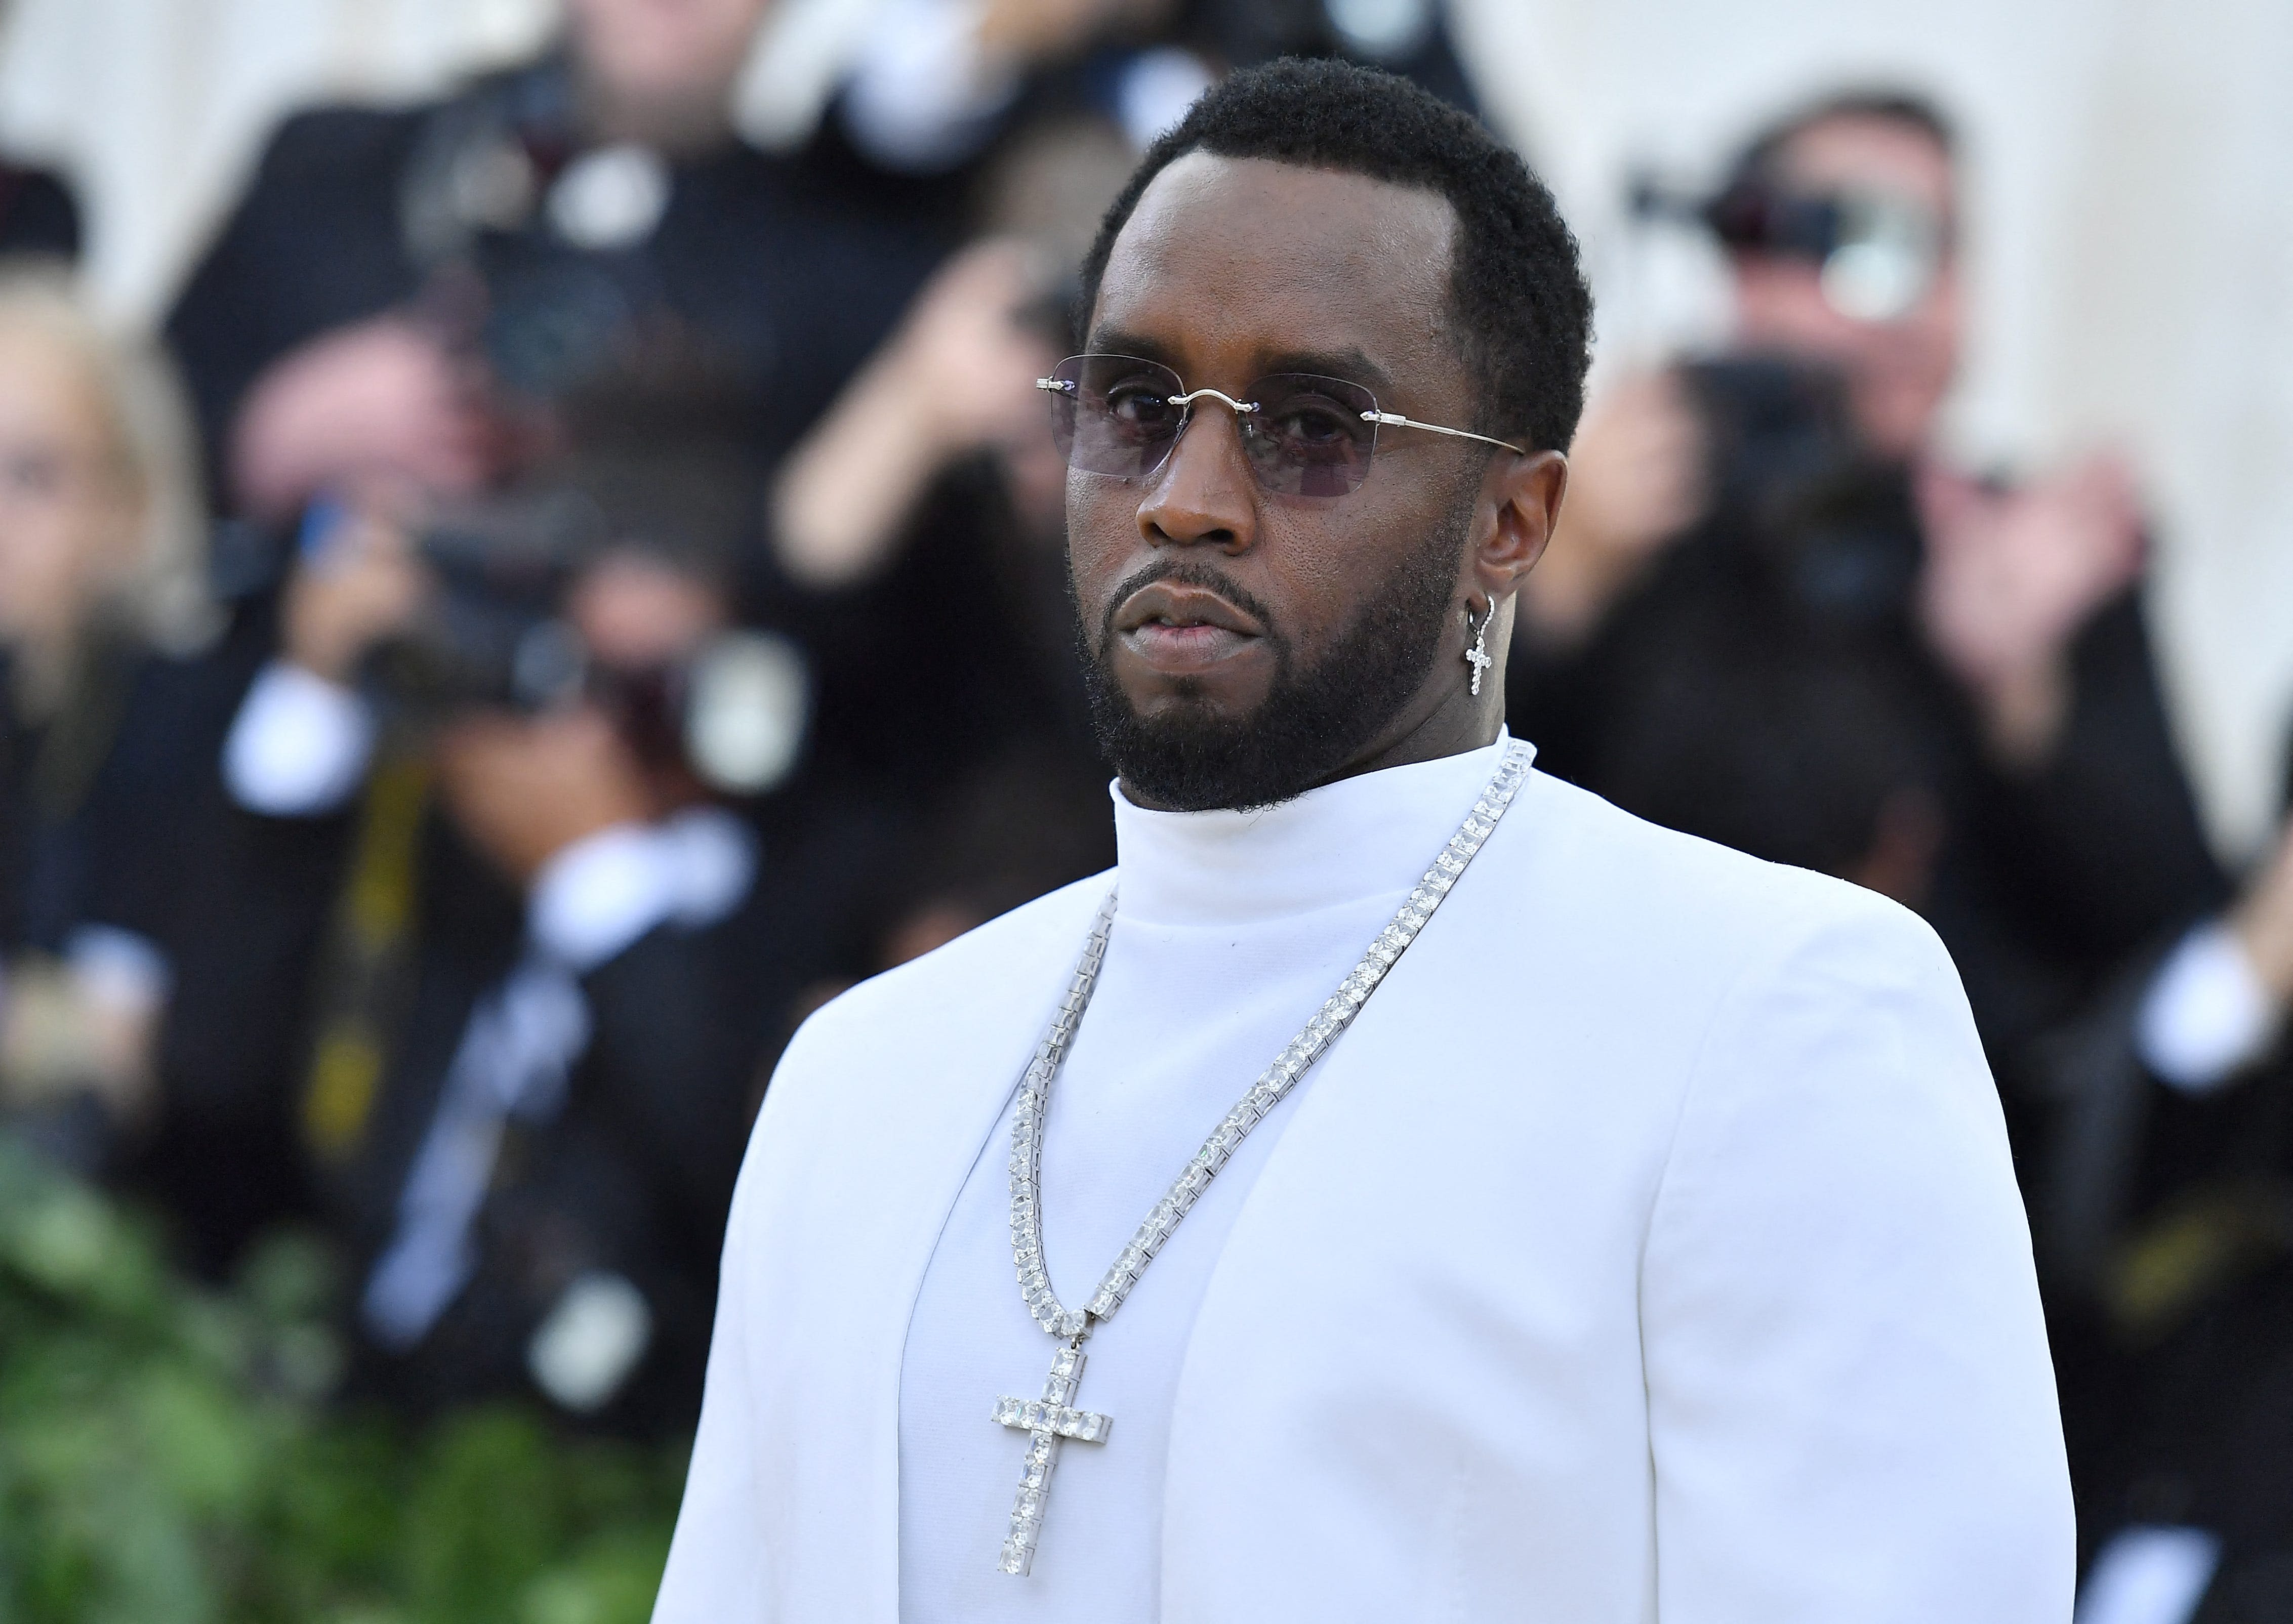 Former model sues Sean 'Diddy' Combs, claims he drugged, sexually assaulted her in 2003